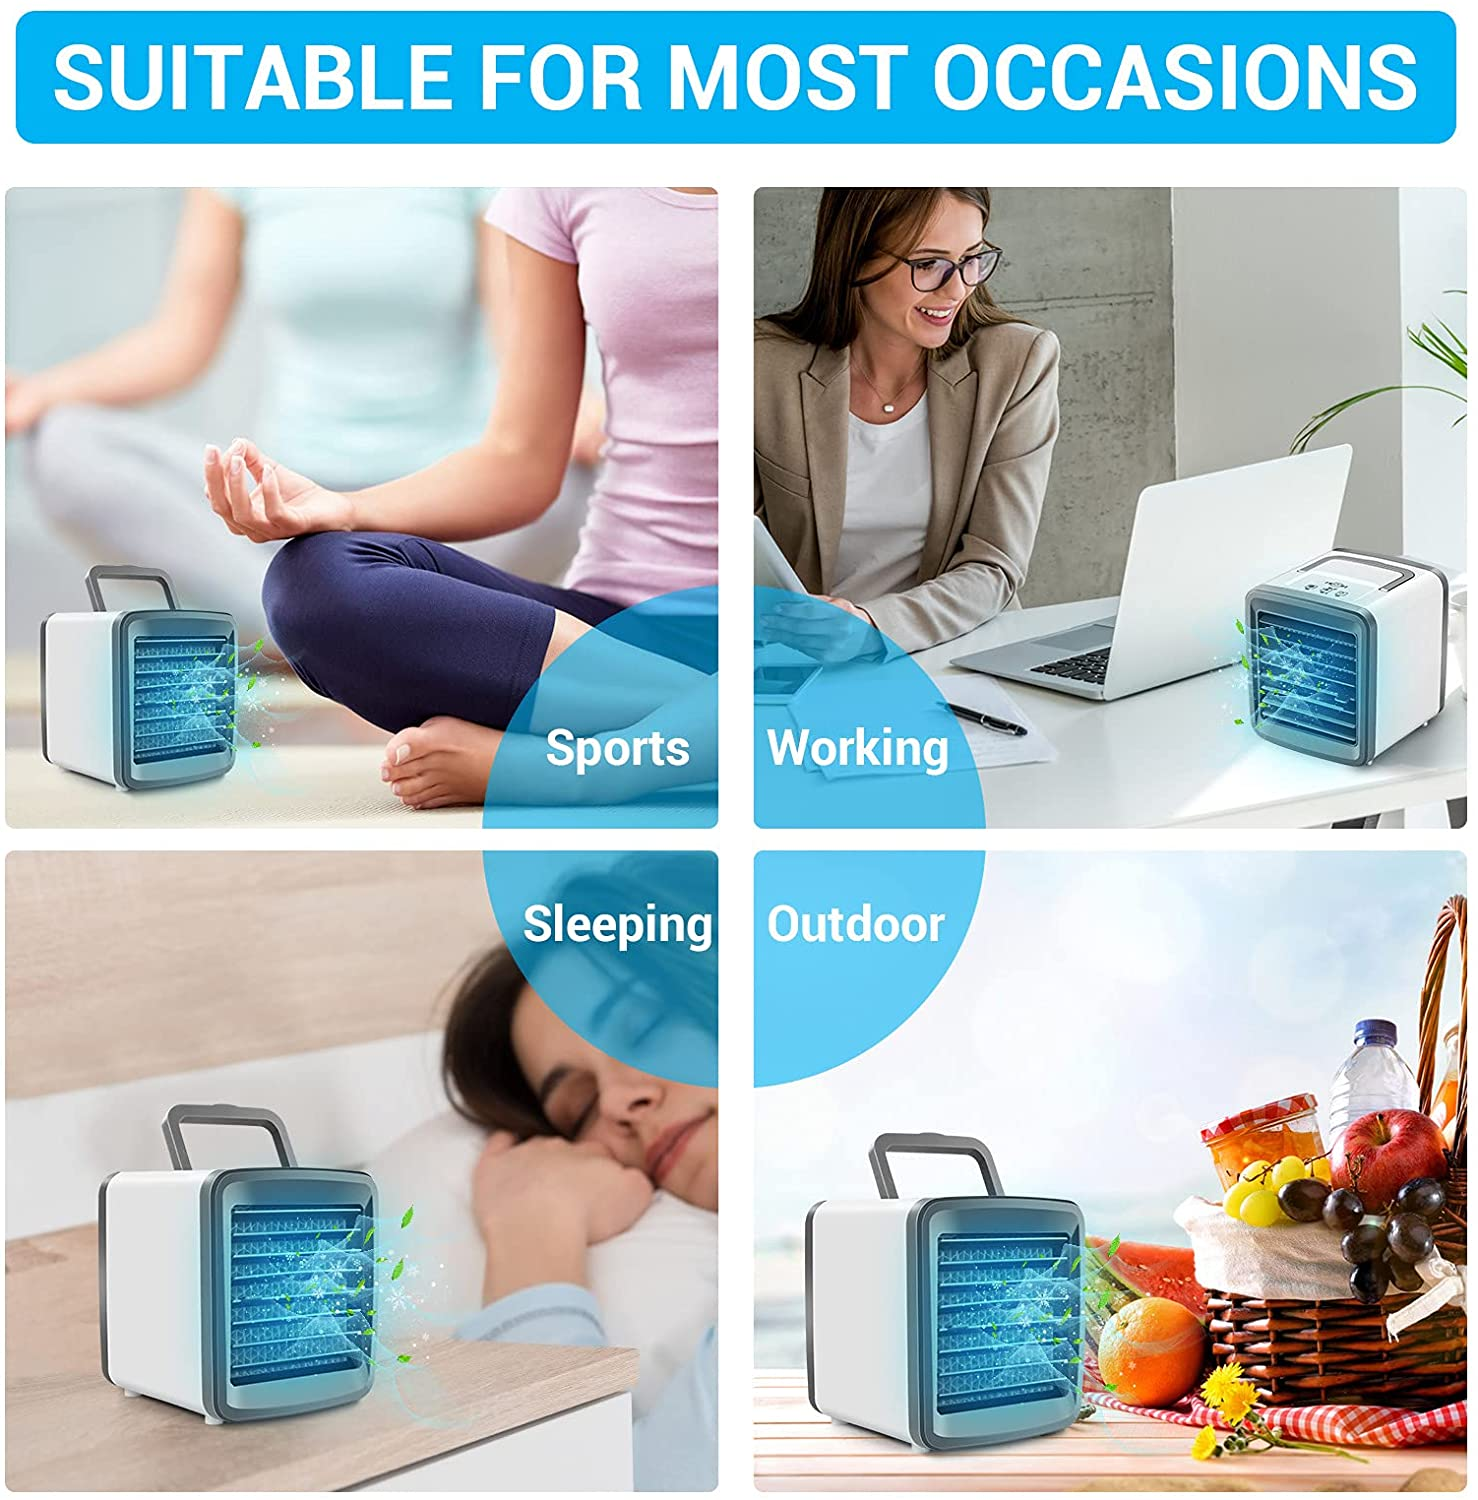 Personal Air Conditioner, Portable Air Cooler Fan with Handle, 4 in 1 Mini Evaporative Cooler USB Rechargeable Desk Fan, Cooling Mist Humidifier with Colorful Led Night Light for Room/Office/Dorm/Bedroom, Grey